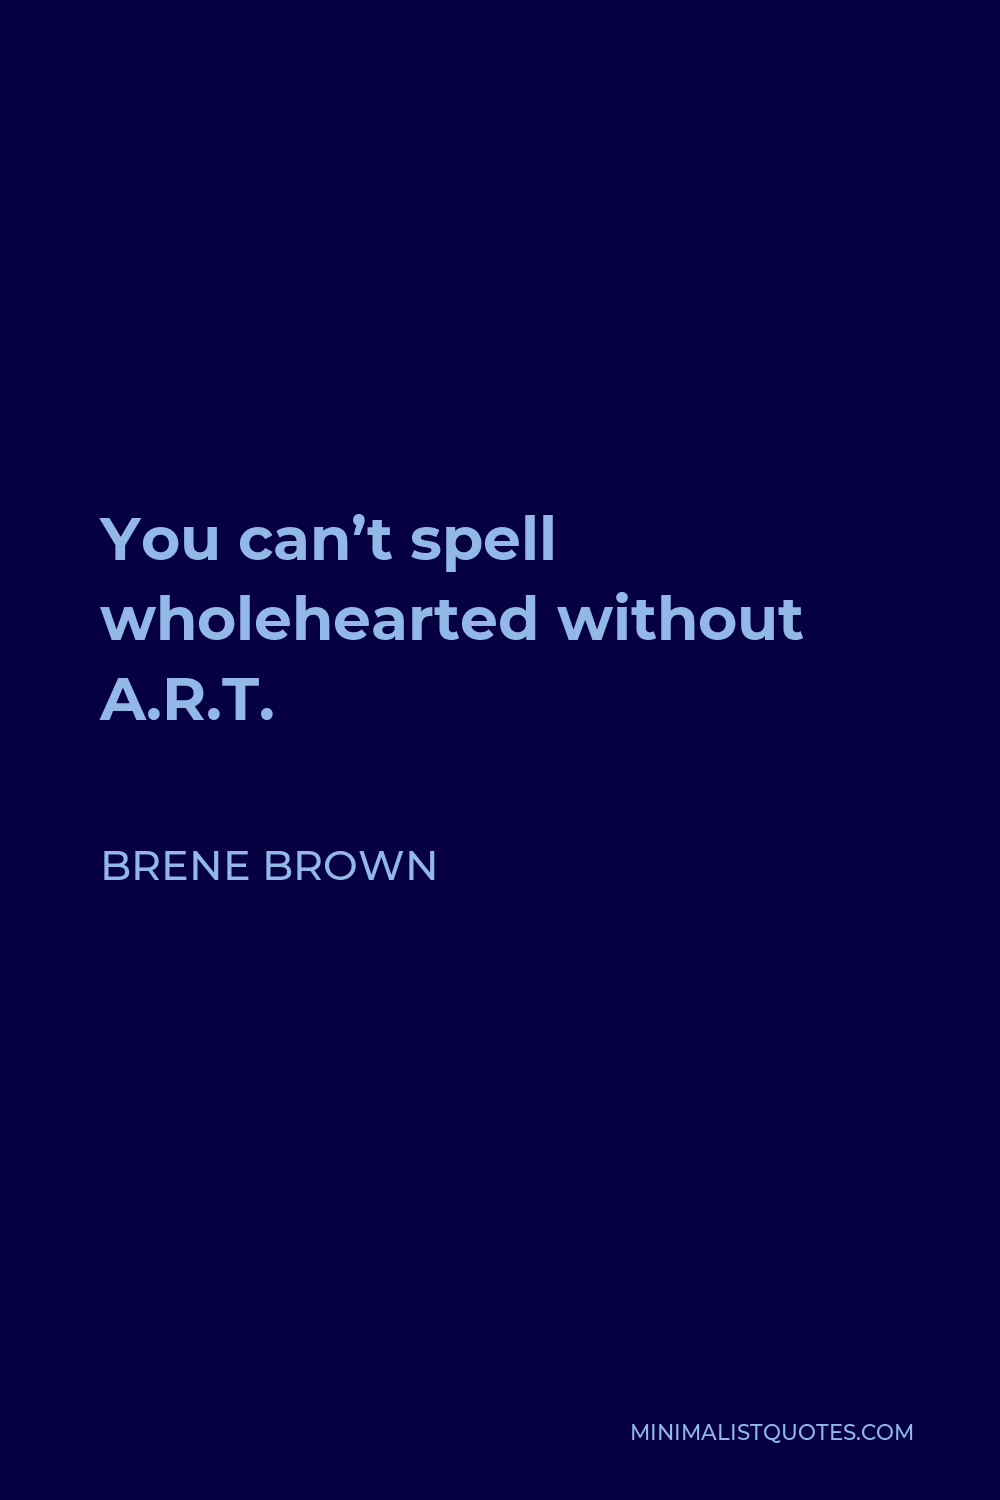 Brene Brown Quote - You can’t spell wholehearted without A.R.T.